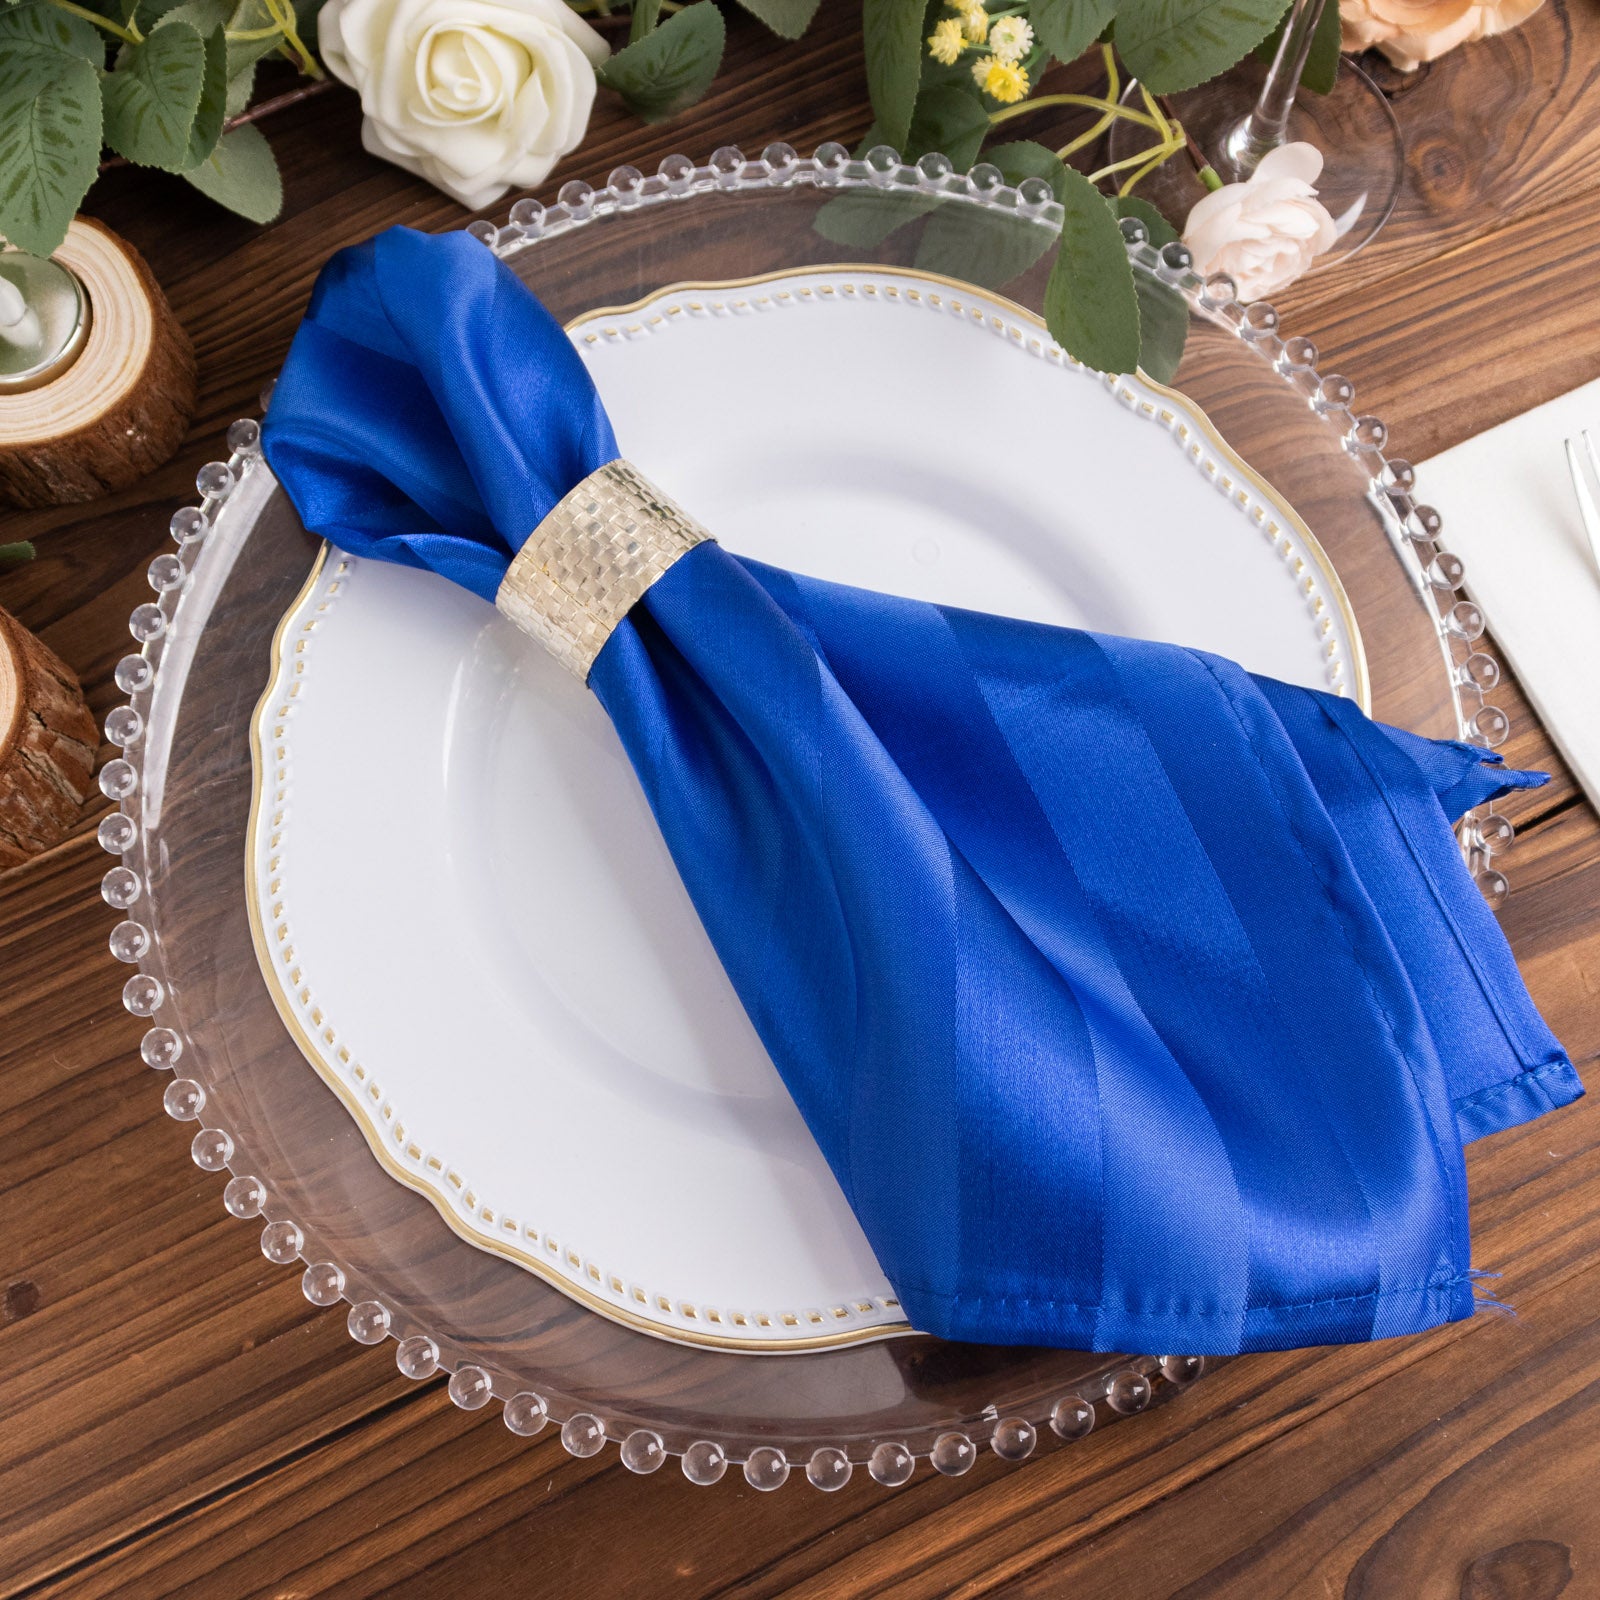 Efavormart 5 Pack Royal Blue Striped Satin Cloth Napkins, Wrinkle-Free Reusable Dinner Napkins - 20 inchx20 inch for Wedding Party Event Banquet